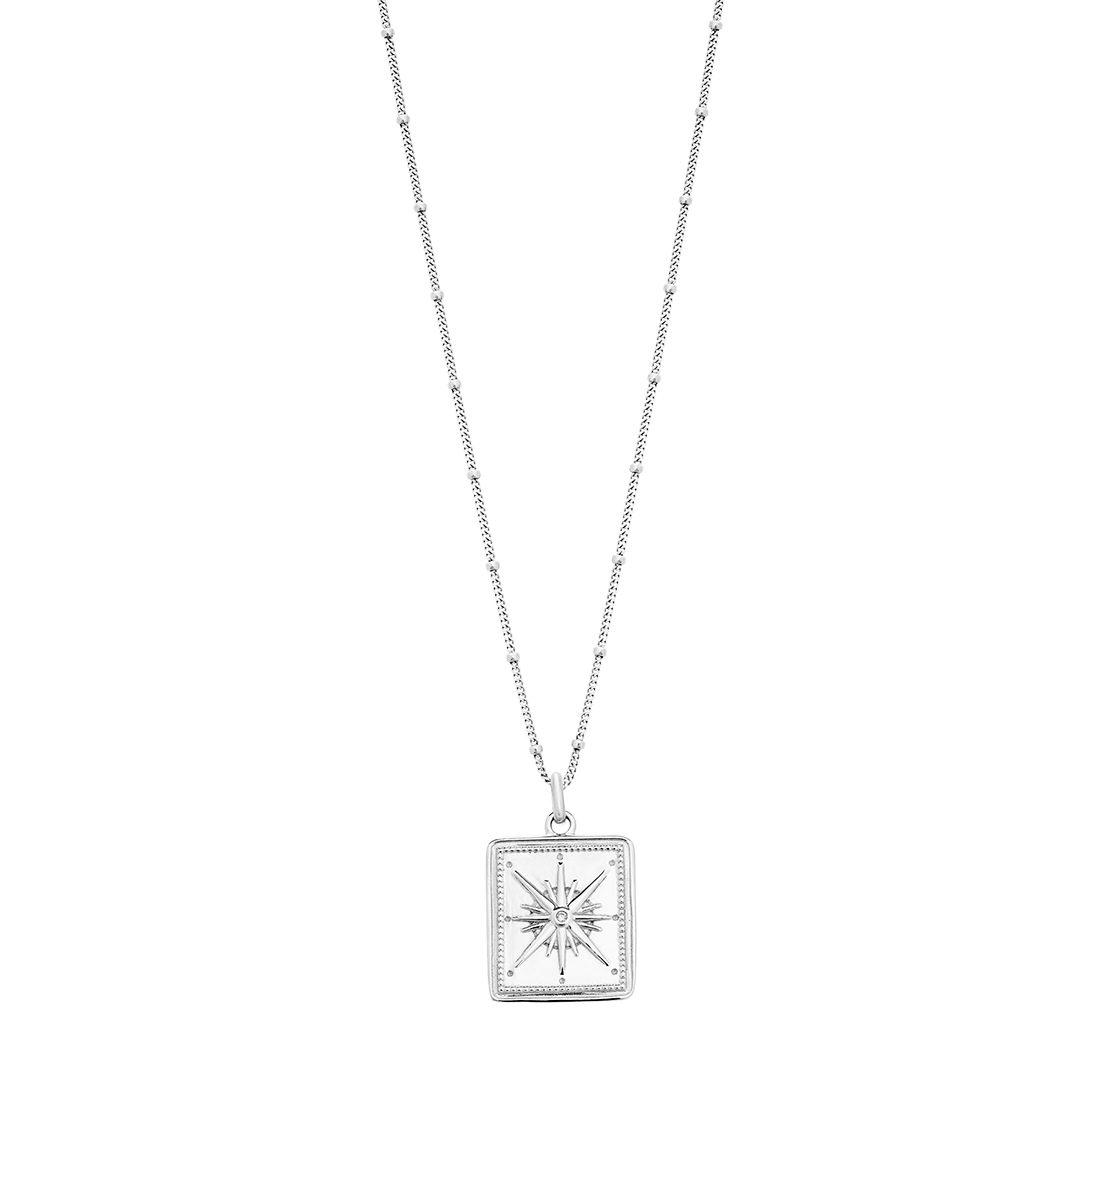 TRUE NORTH COIN NECKLACE (STERLING SILVER) - IMAGE 1